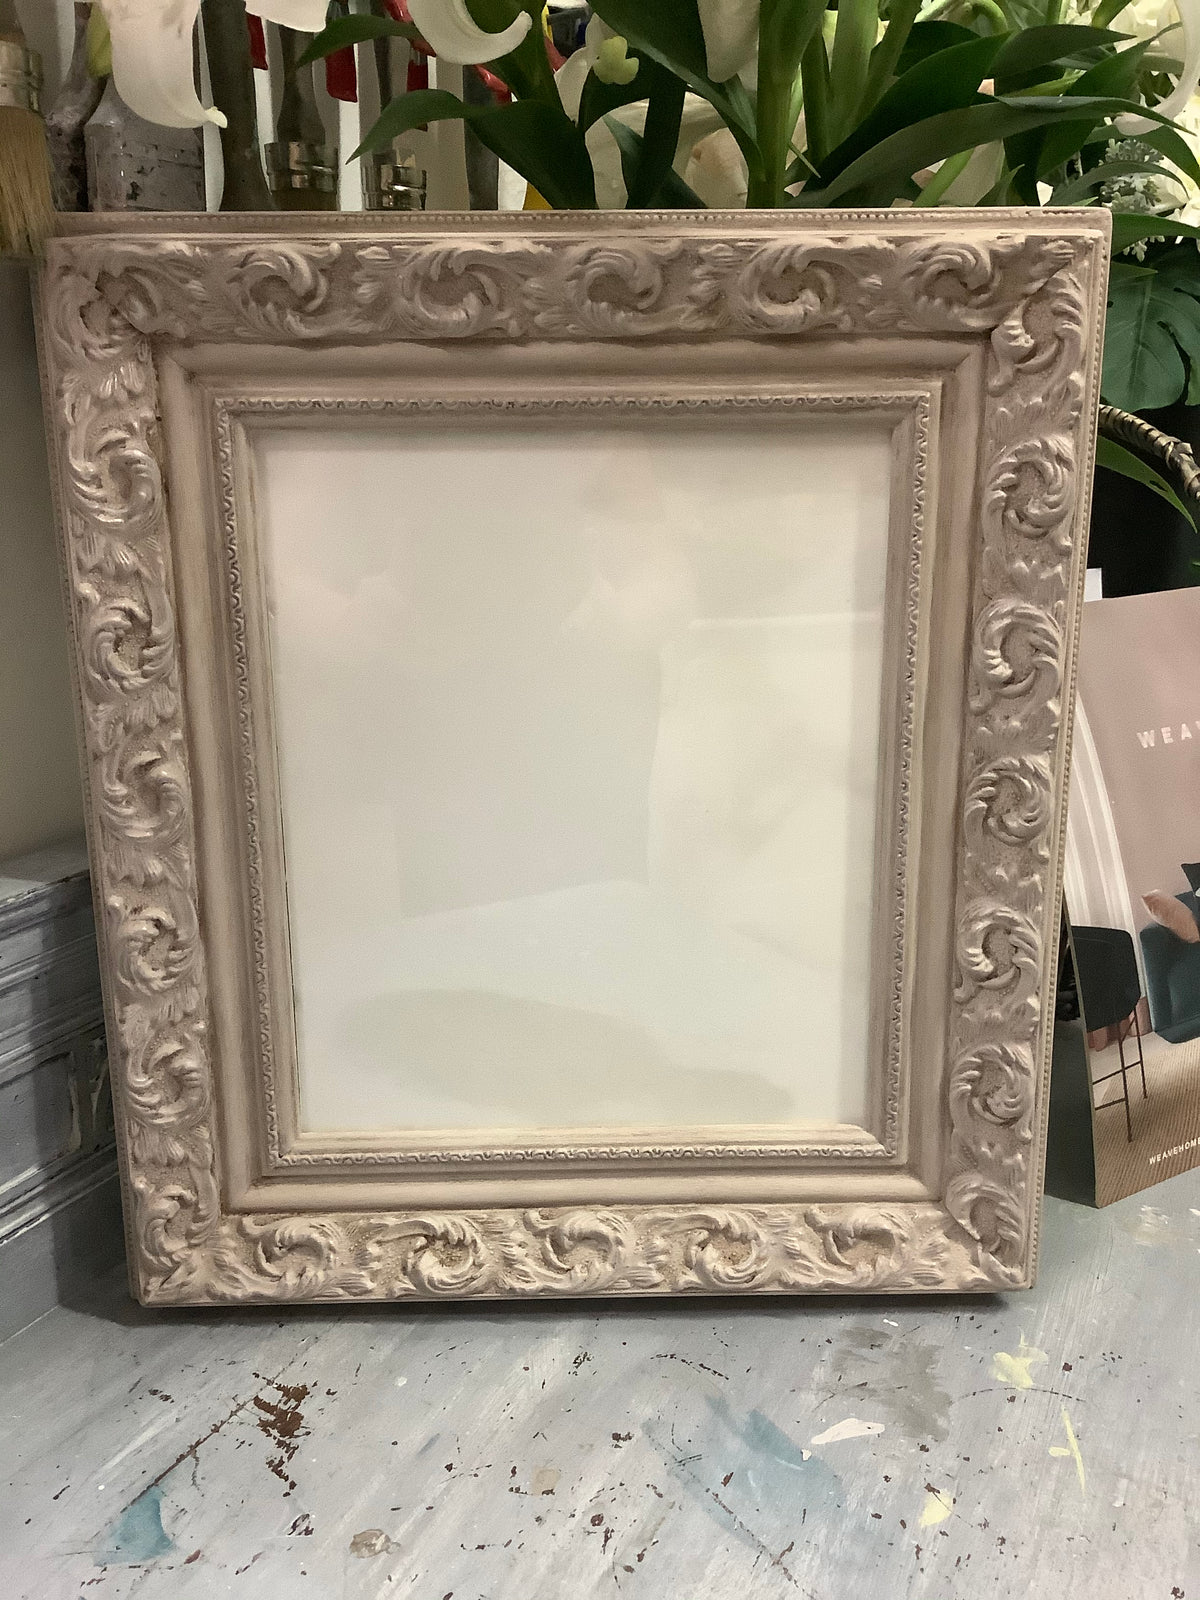 HAND PAINTED ANTIQUED PHOTO FRAMES